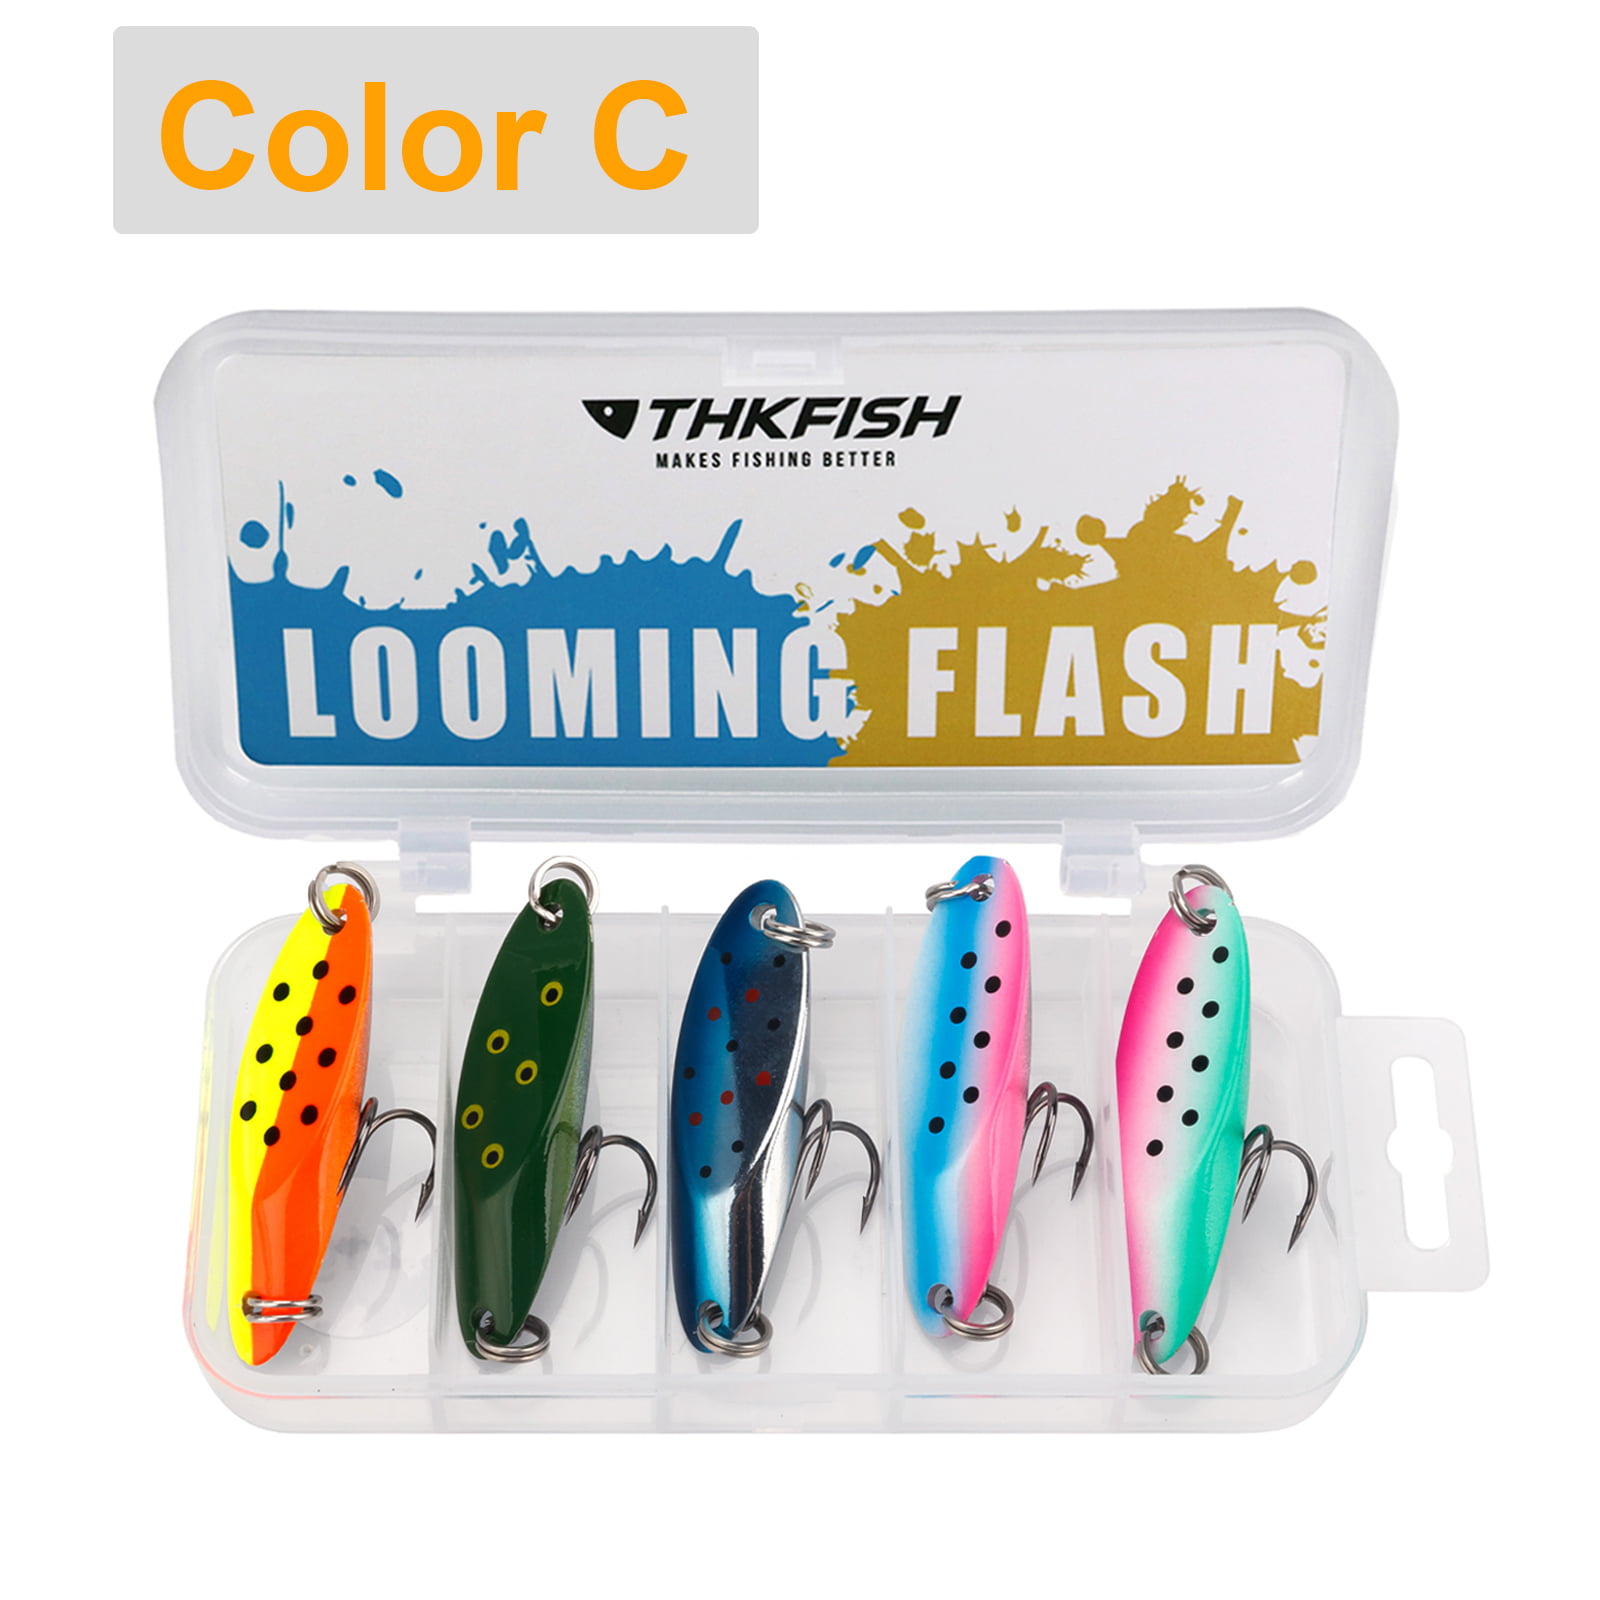 THKFISH Fishing Lures Trout Lures Fishing Spoons Lures for Trout Pike Bass  Crappie Walleye Color C 1/2oz 5pcs